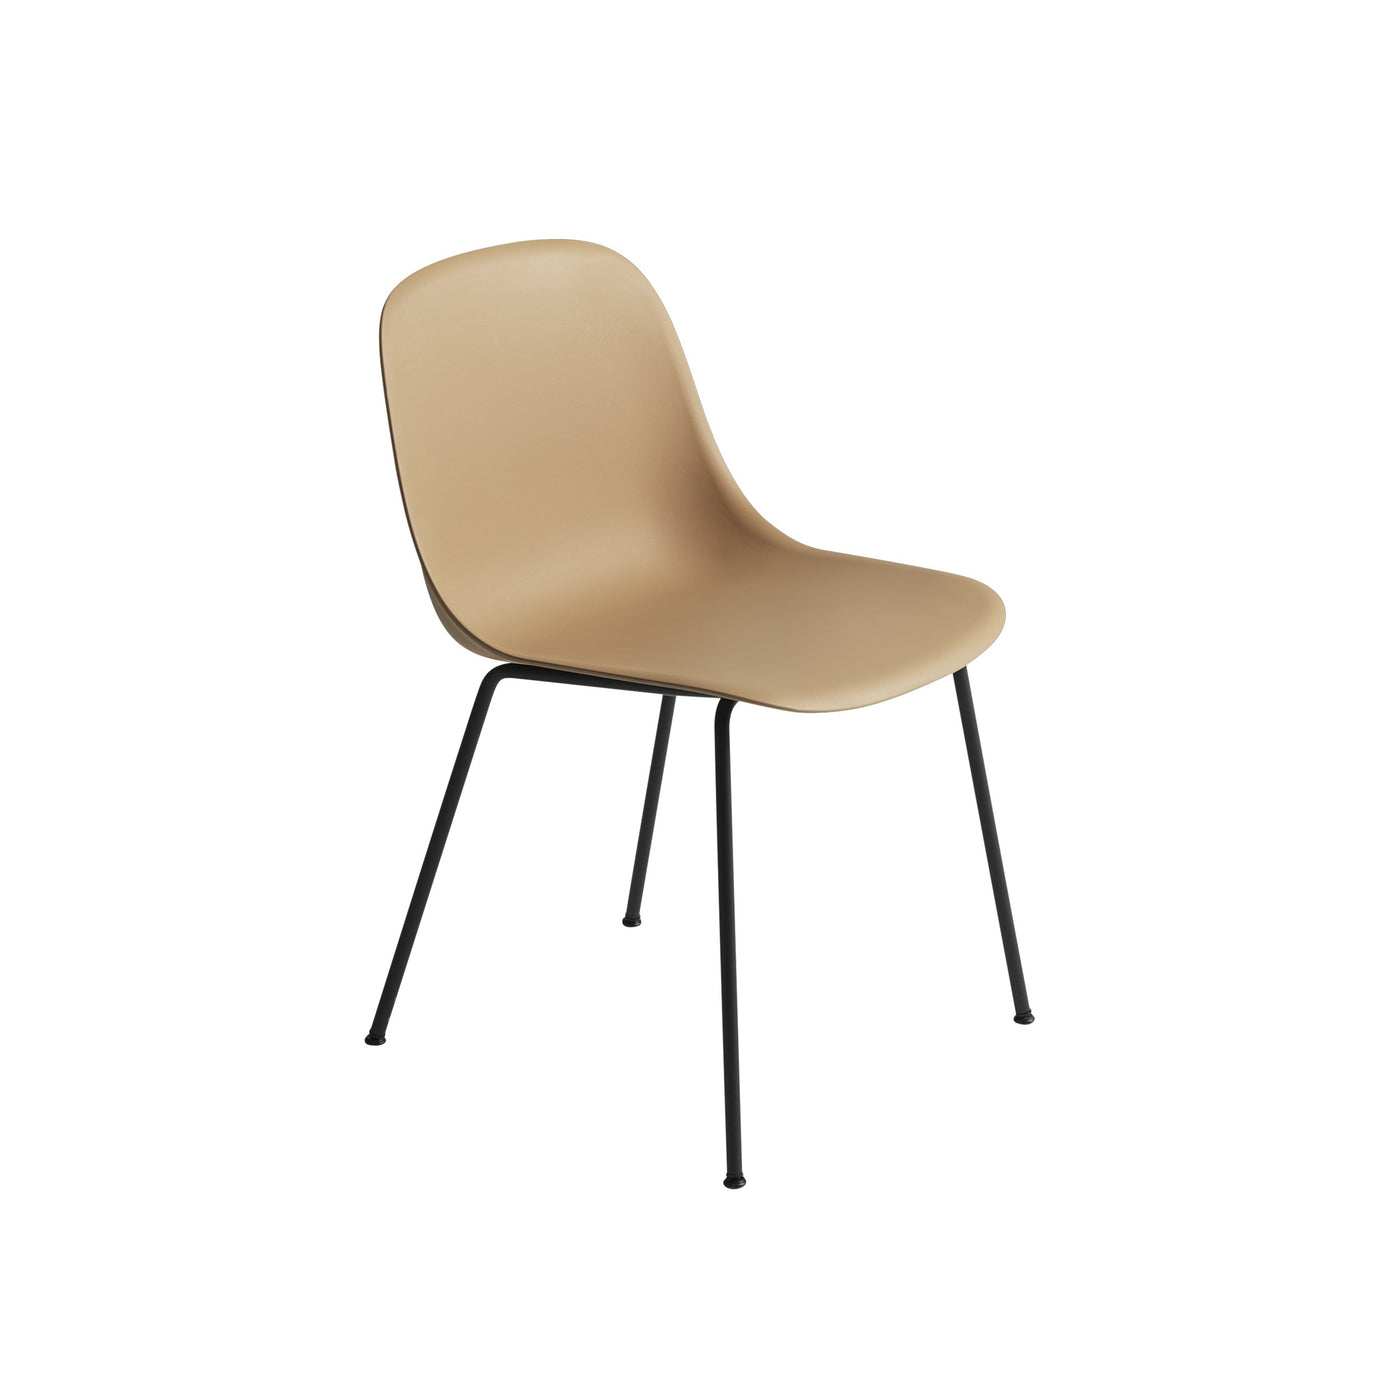 Muuto Fiber Side Chair Tube Base, ochre seat and black legs. Available from someday designs. #colour_ochre